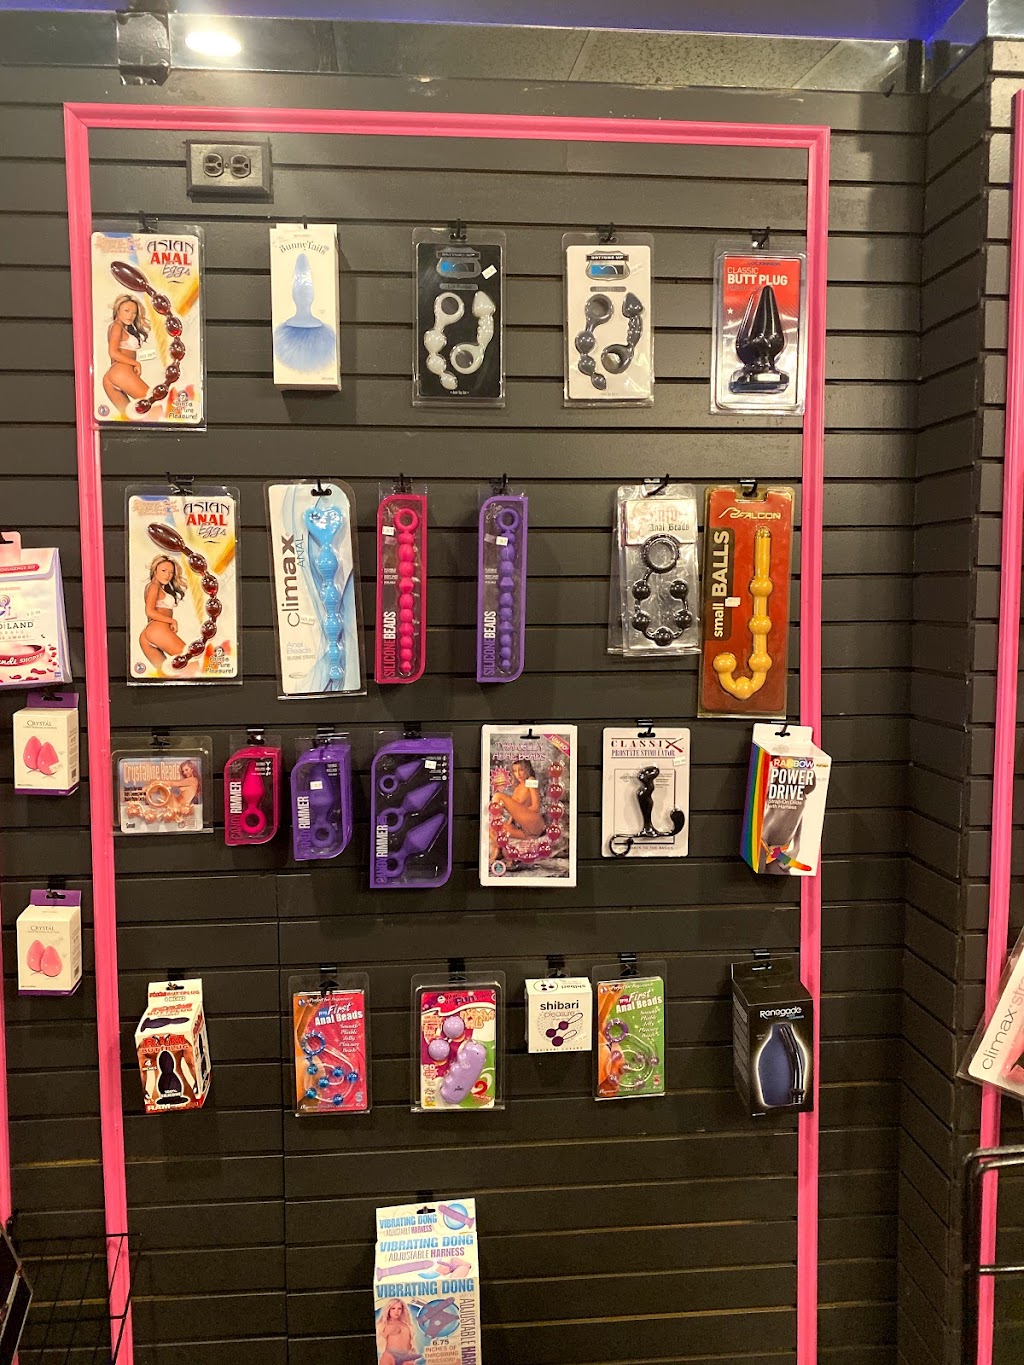 Kiss Adult Toys and Lingerie | 441 Walt Whitman Rd, Melville, NY 11747 | Phone: (631) 549-1414